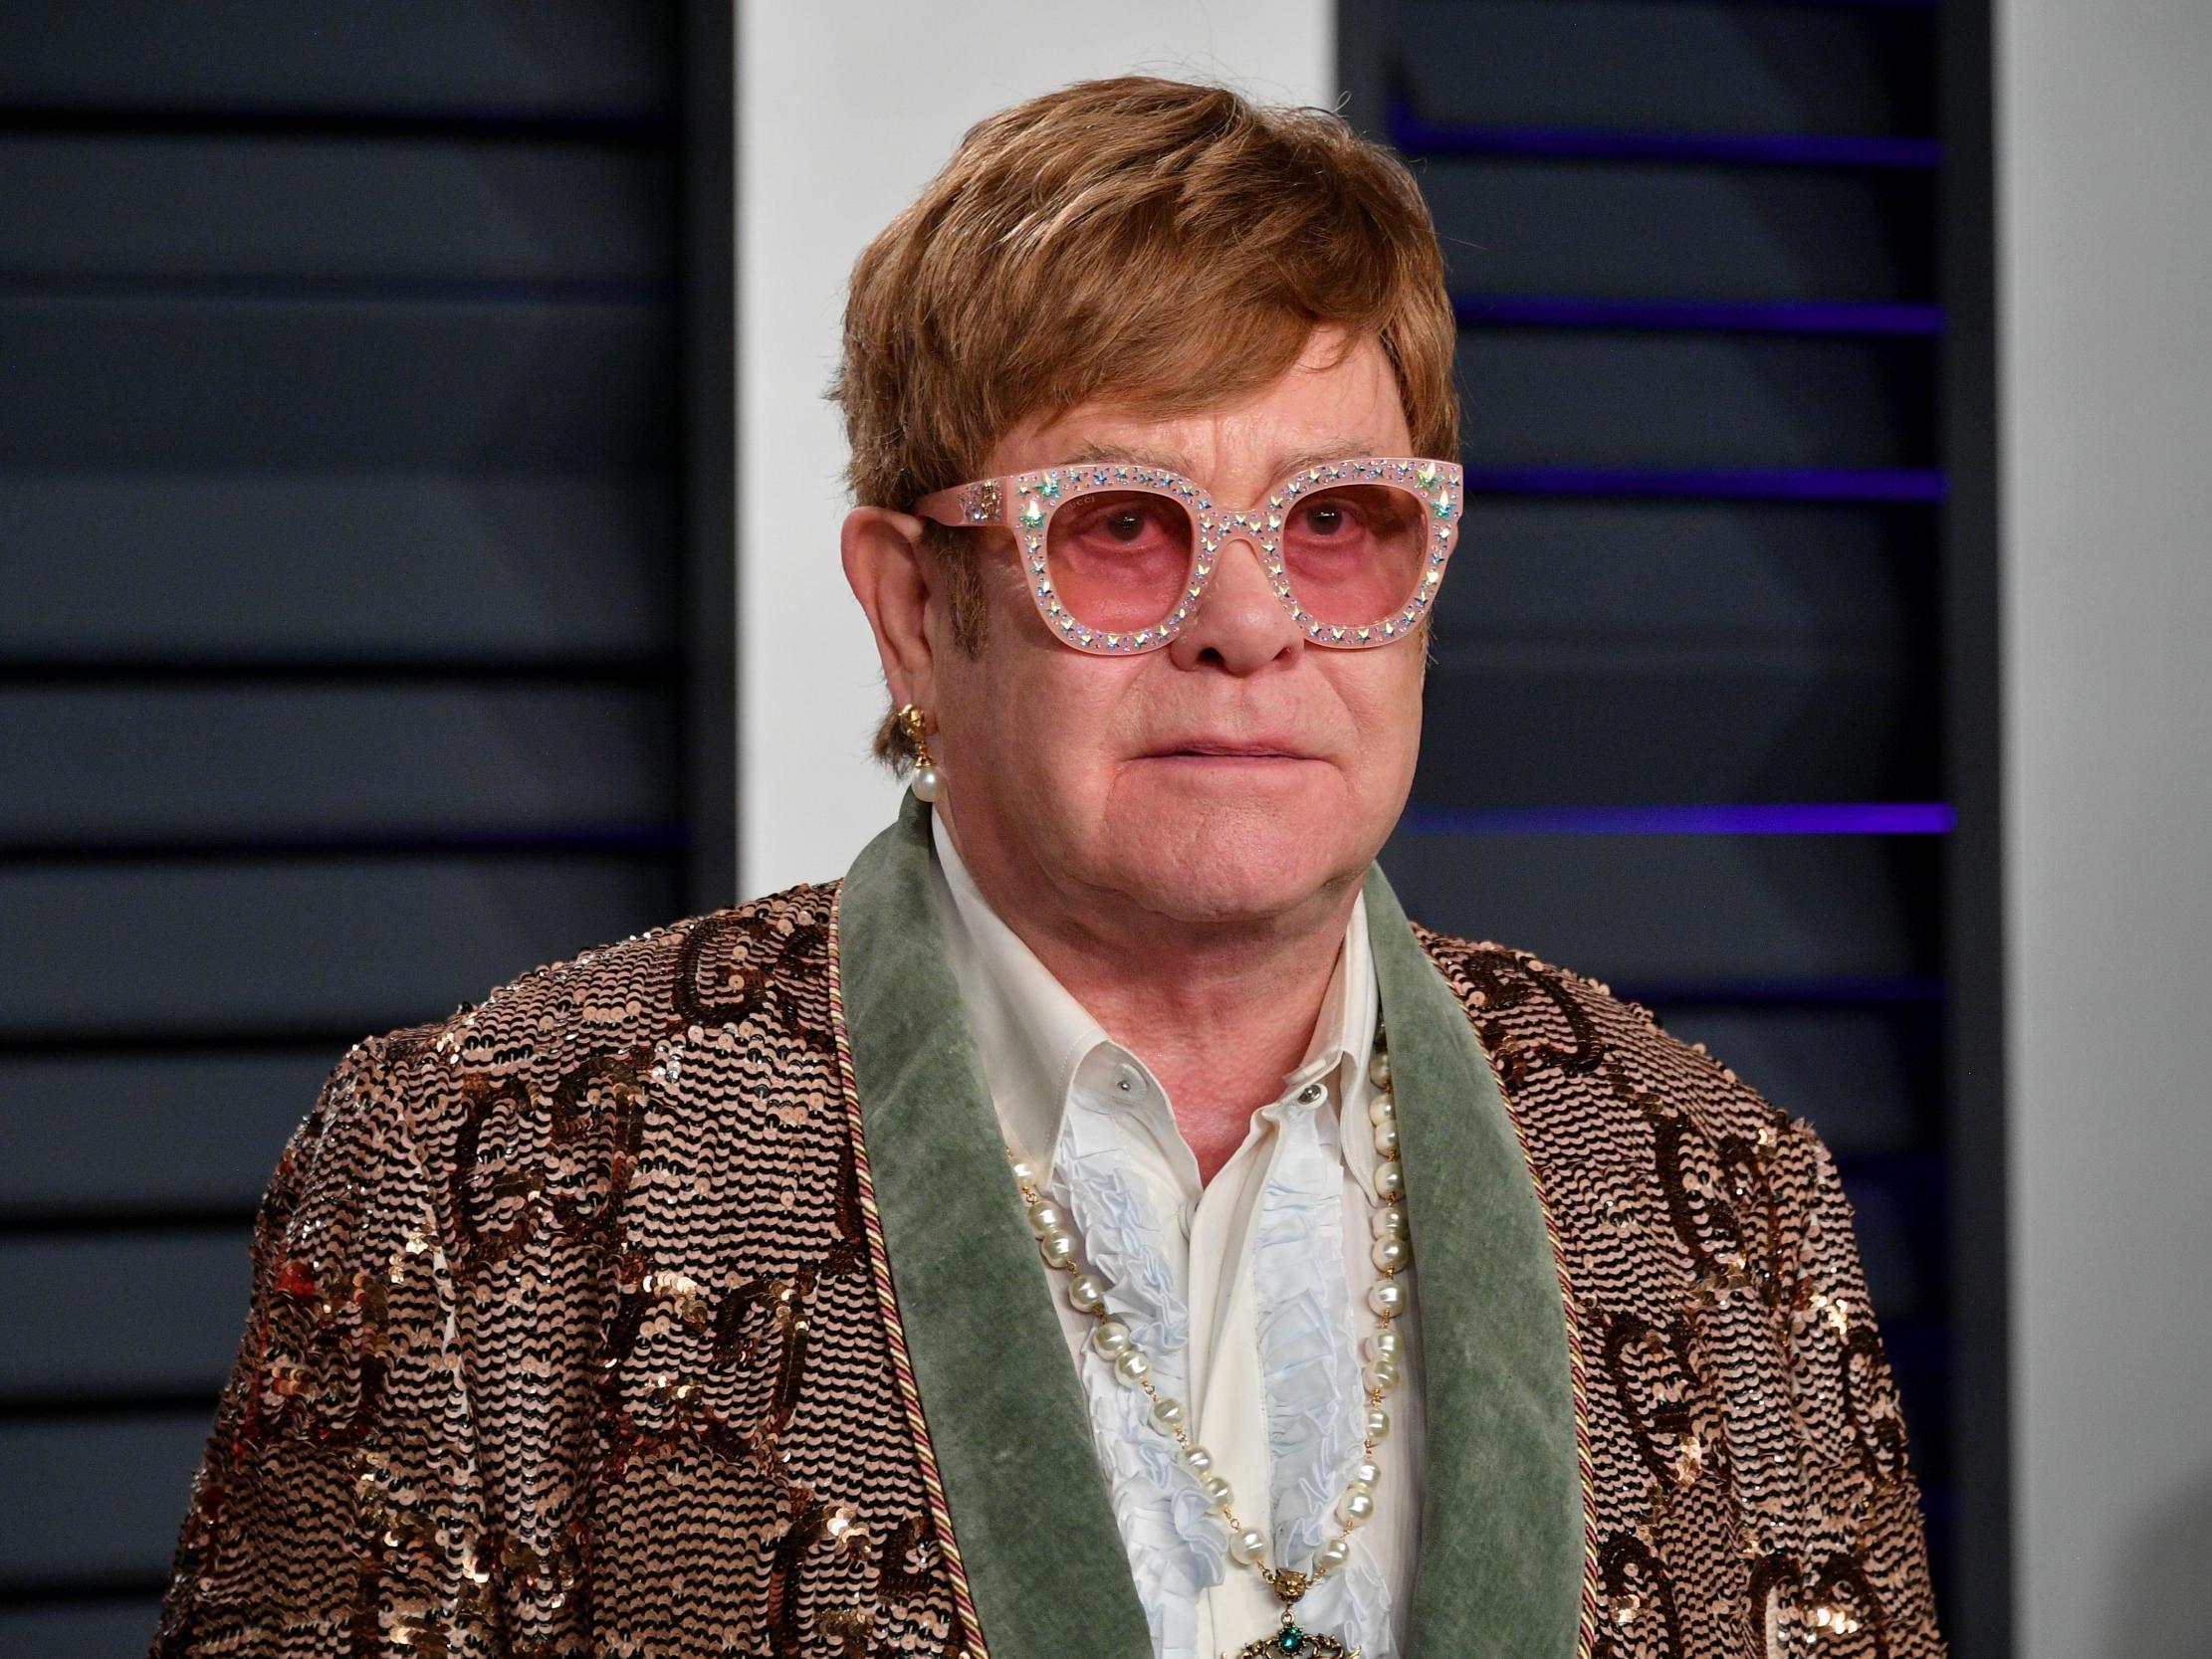 Coronavirus: Elton John launches $1 million fund to help protect people with HIV during pandemic